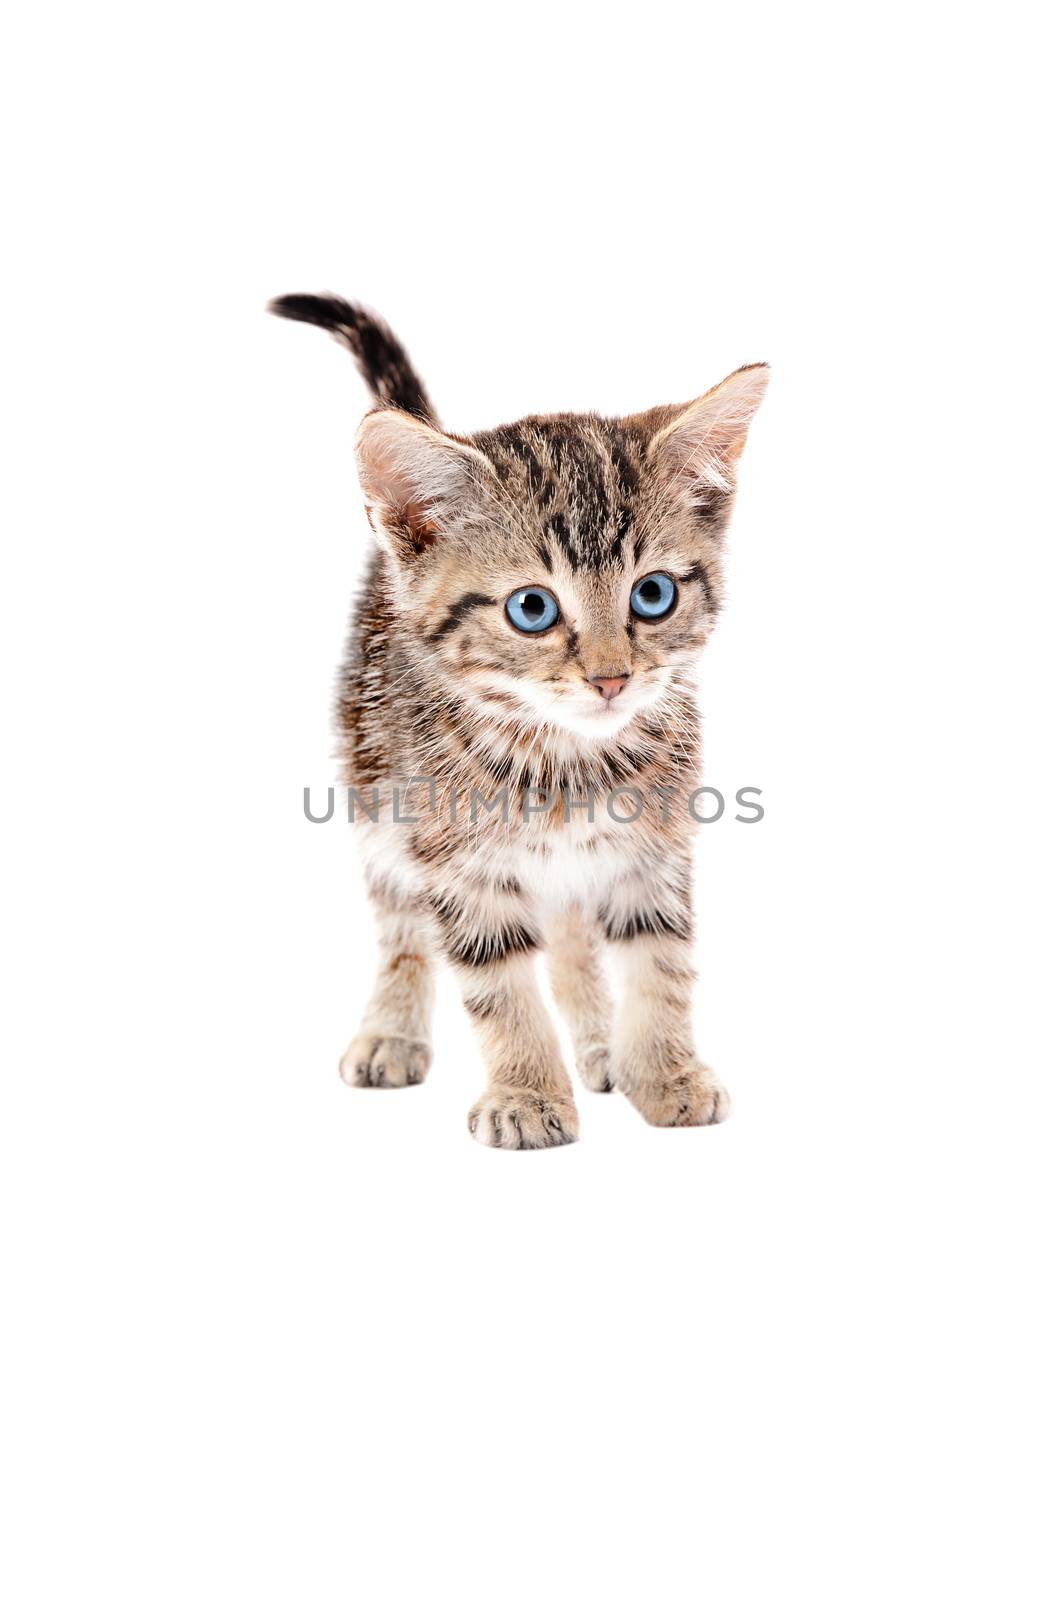 Cute Tabby Kitten with Blue Eyes by dnsphotography